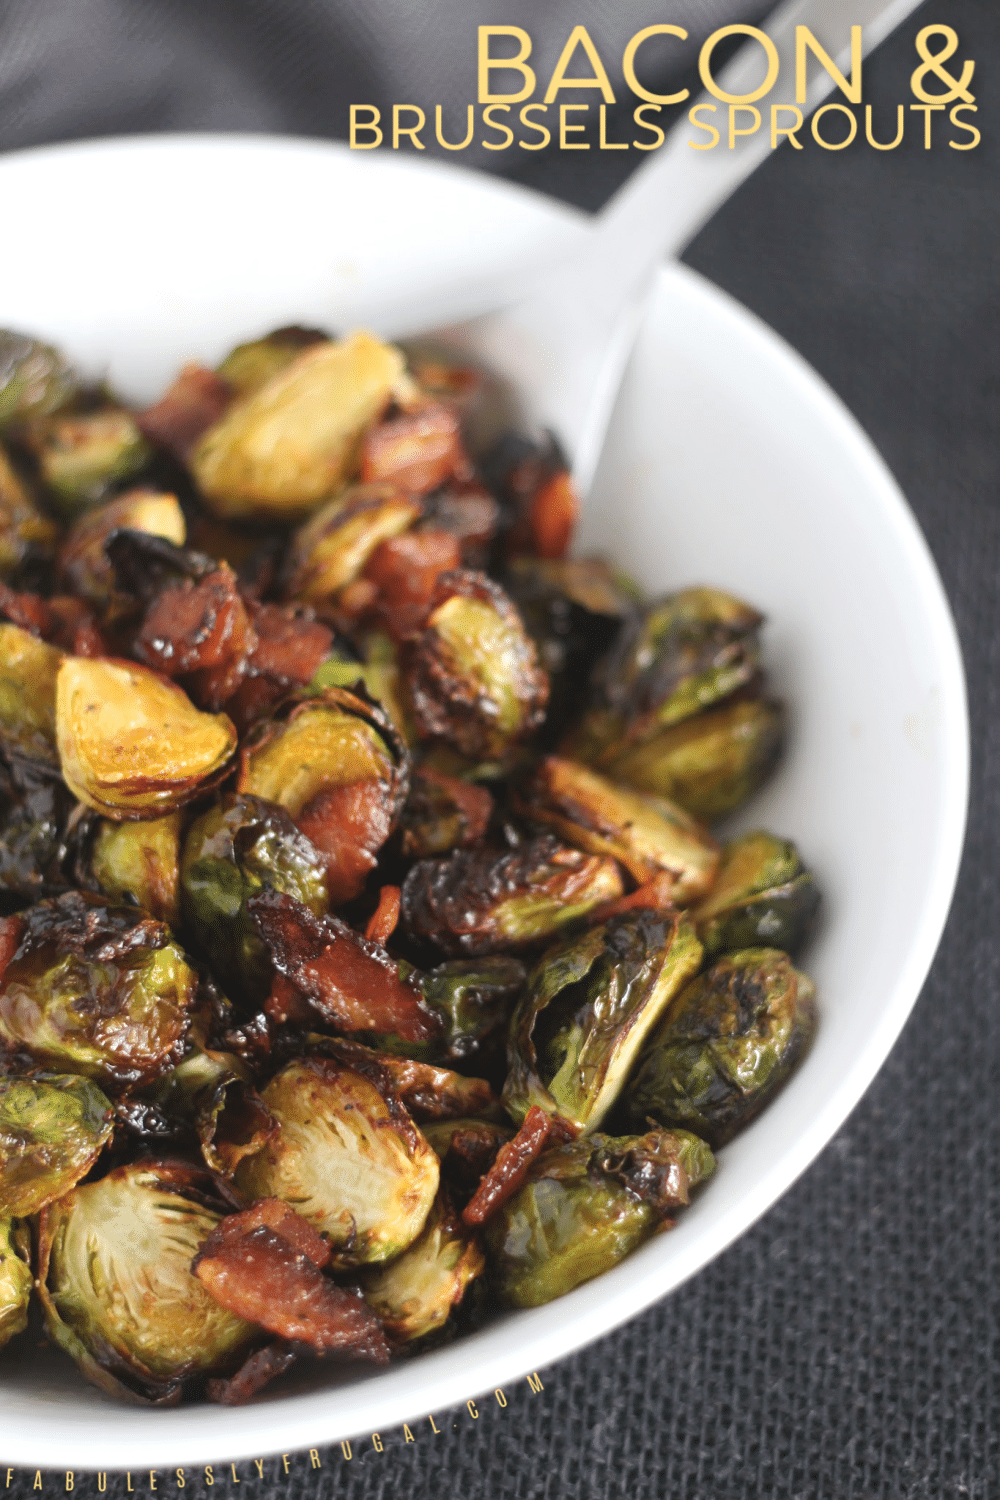 Bacon and brussels sprouts dish